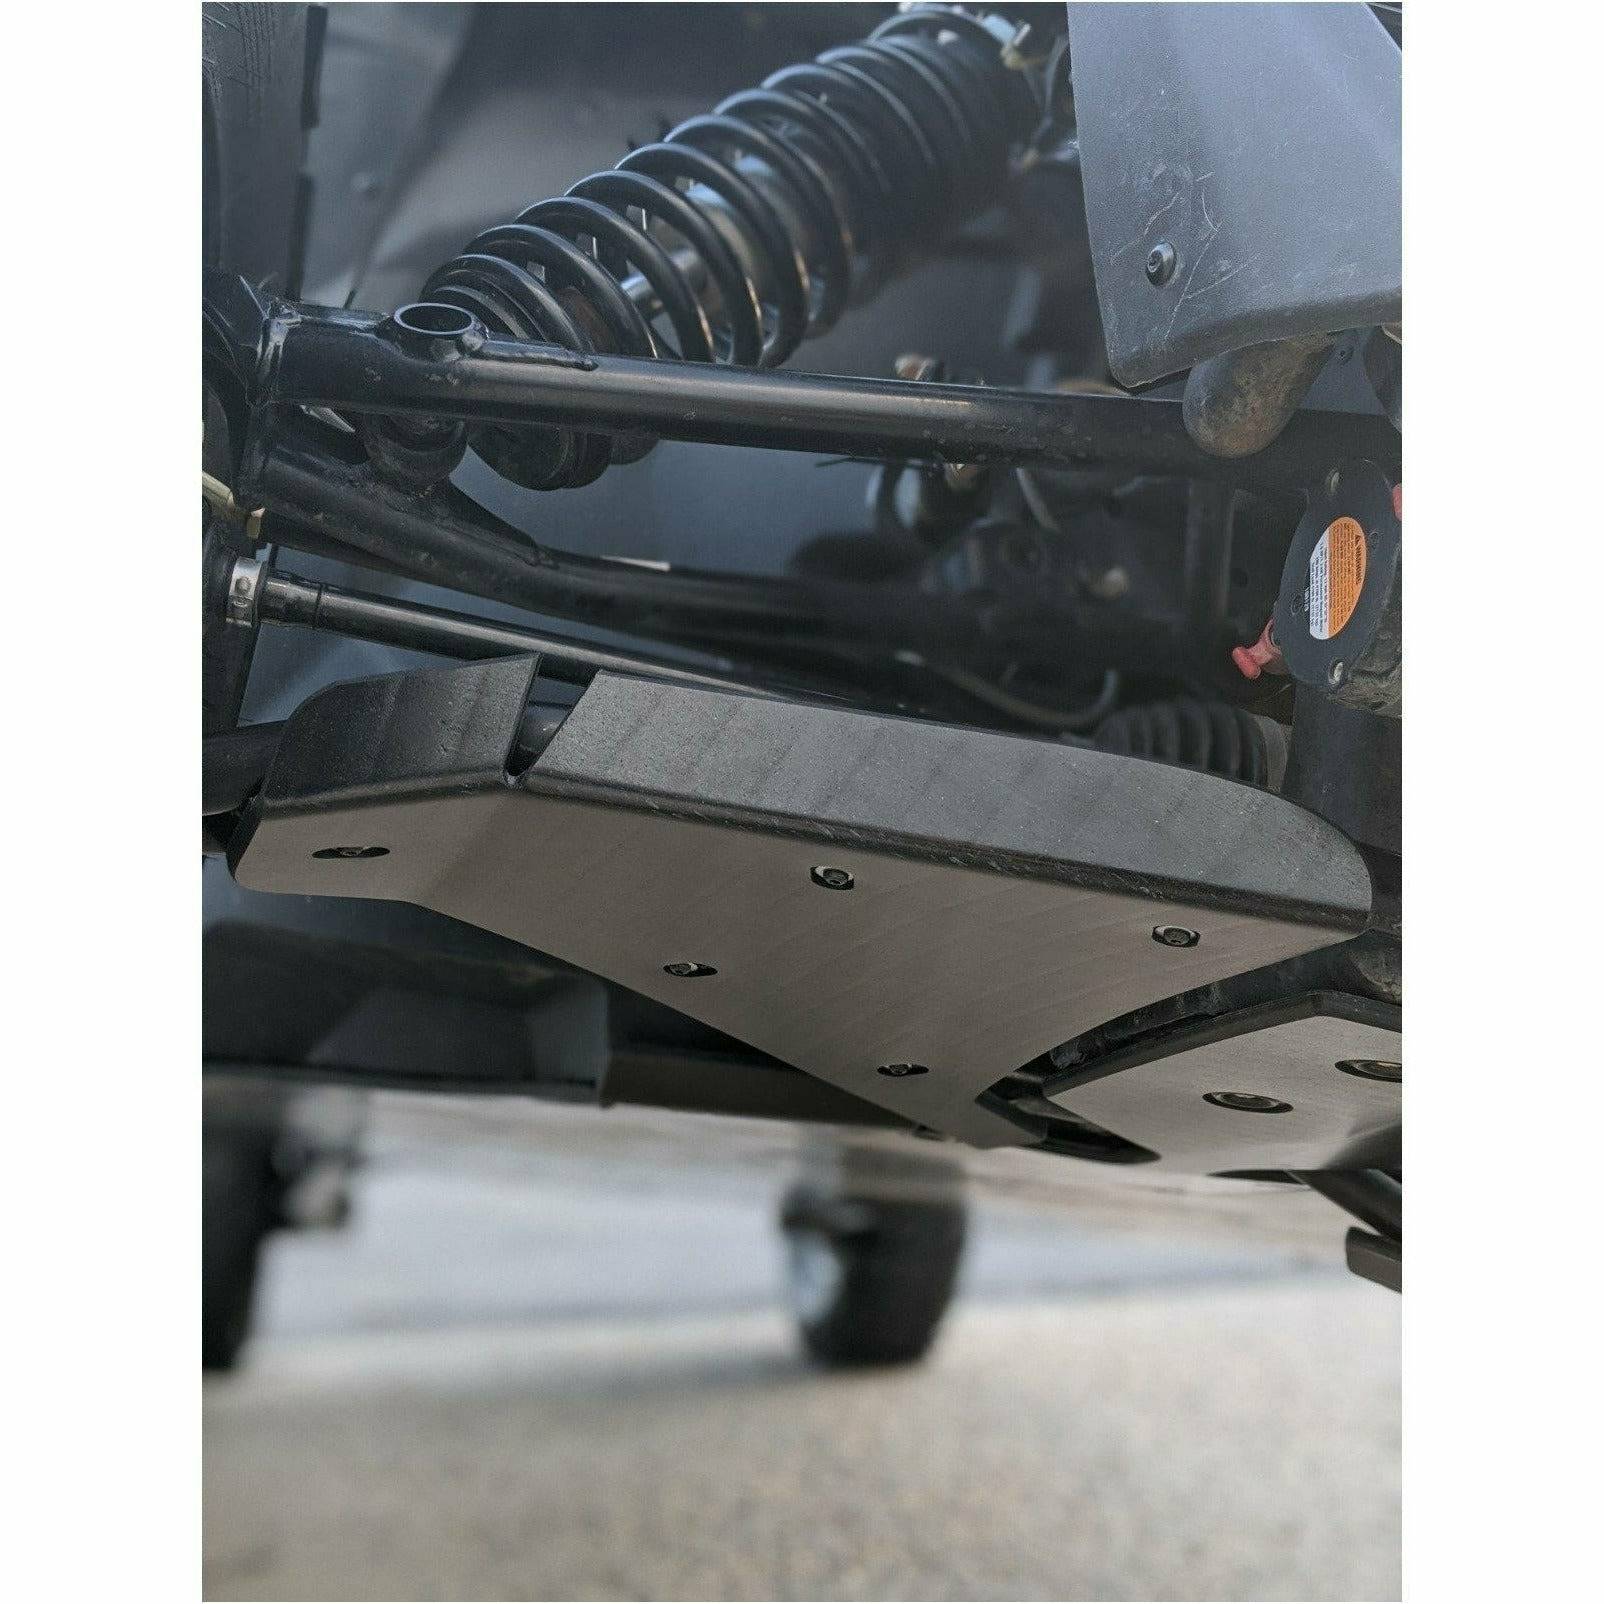 SSS Off-Road UHMW Arm Guards for Can Am Maverick X3